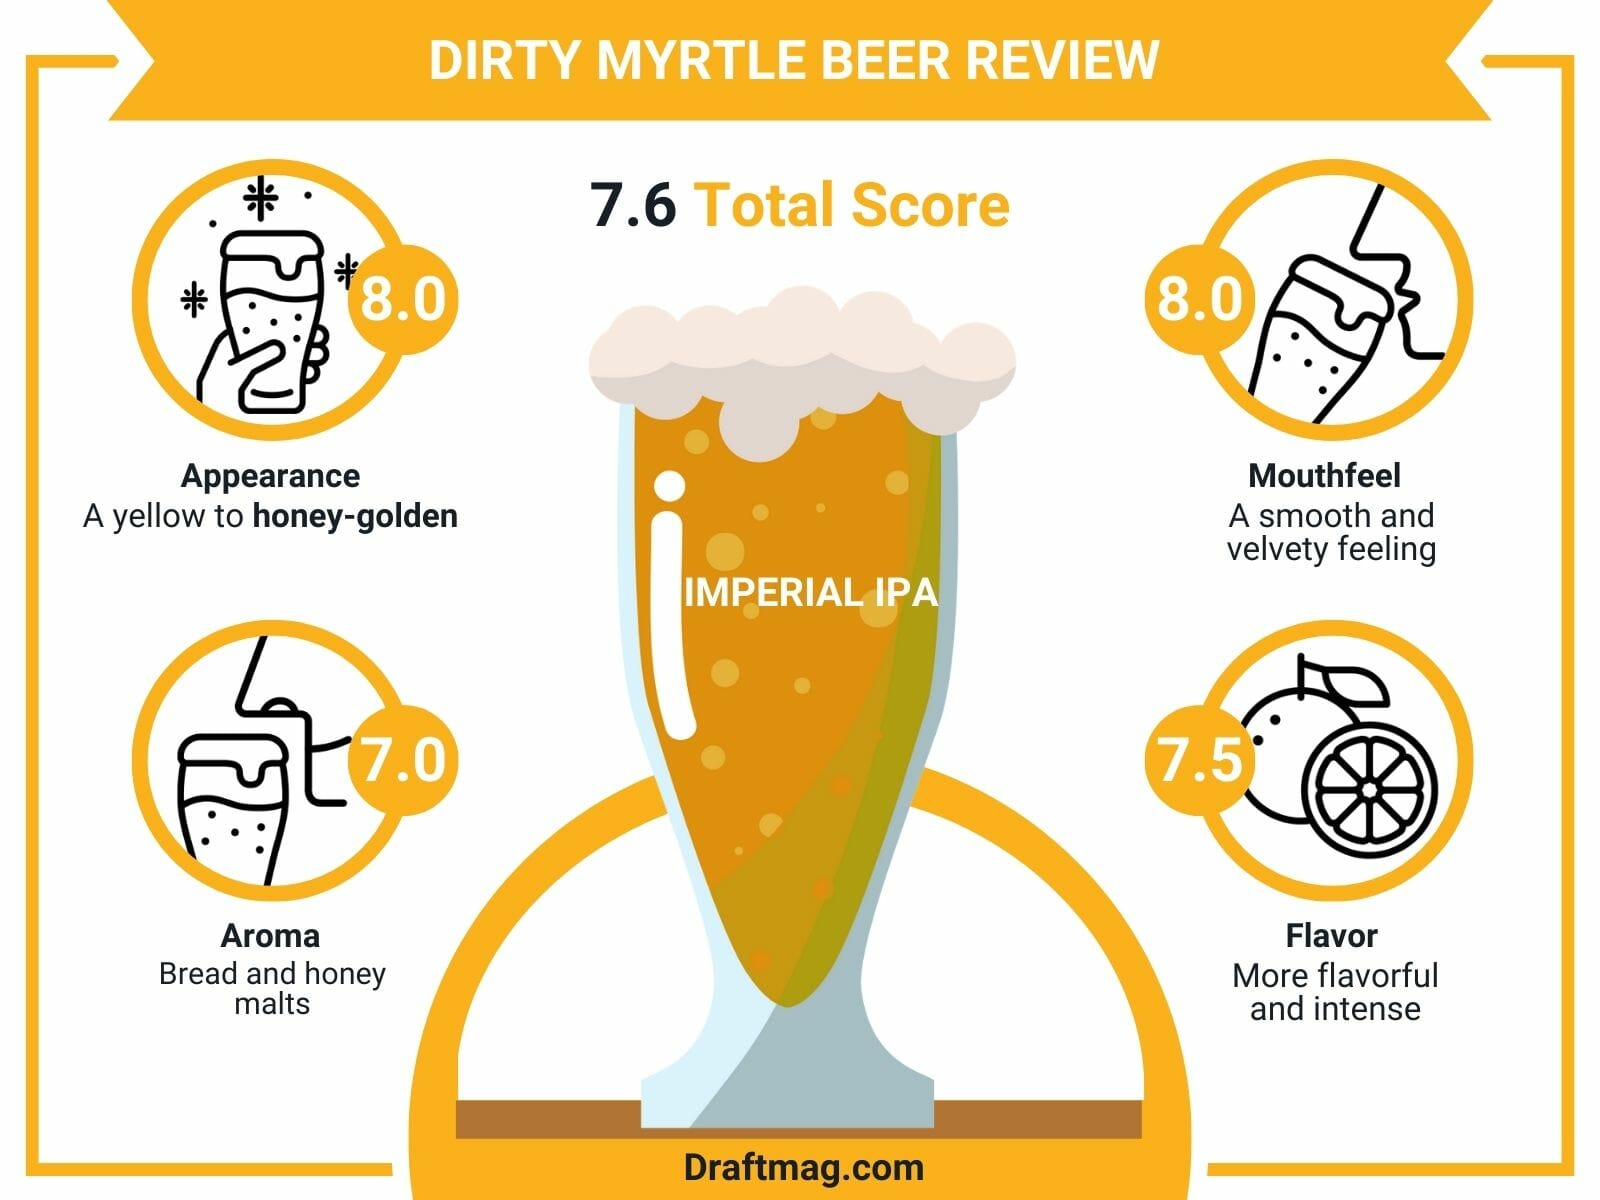 Dirty Myrtle Beer Review Infographic